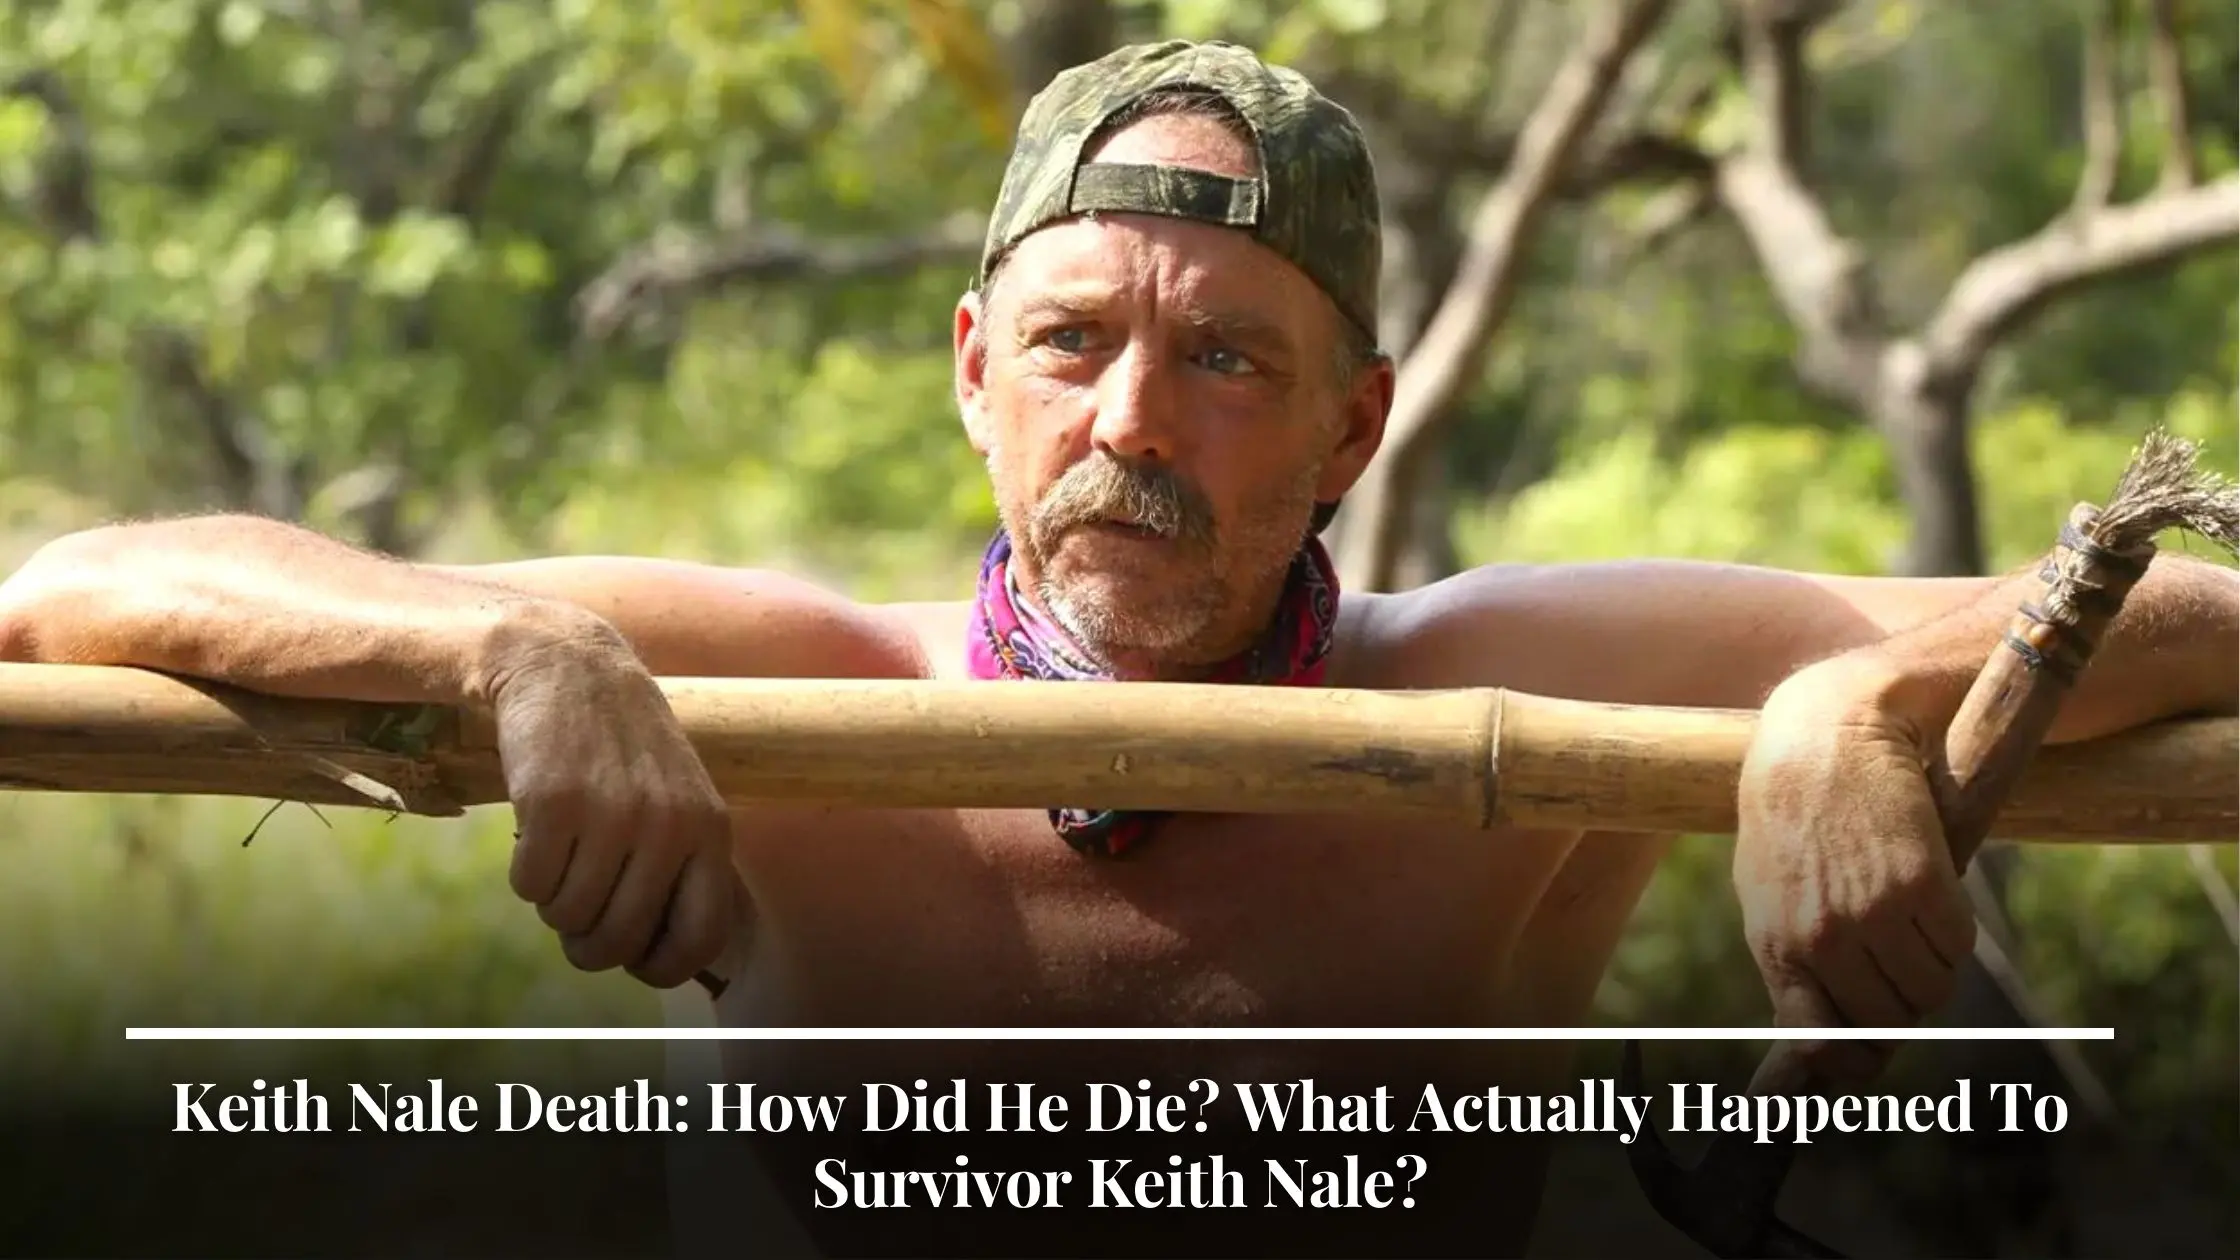 Keith Nale Death How Did He Die What Actually Happened To Survivor Keith Nale